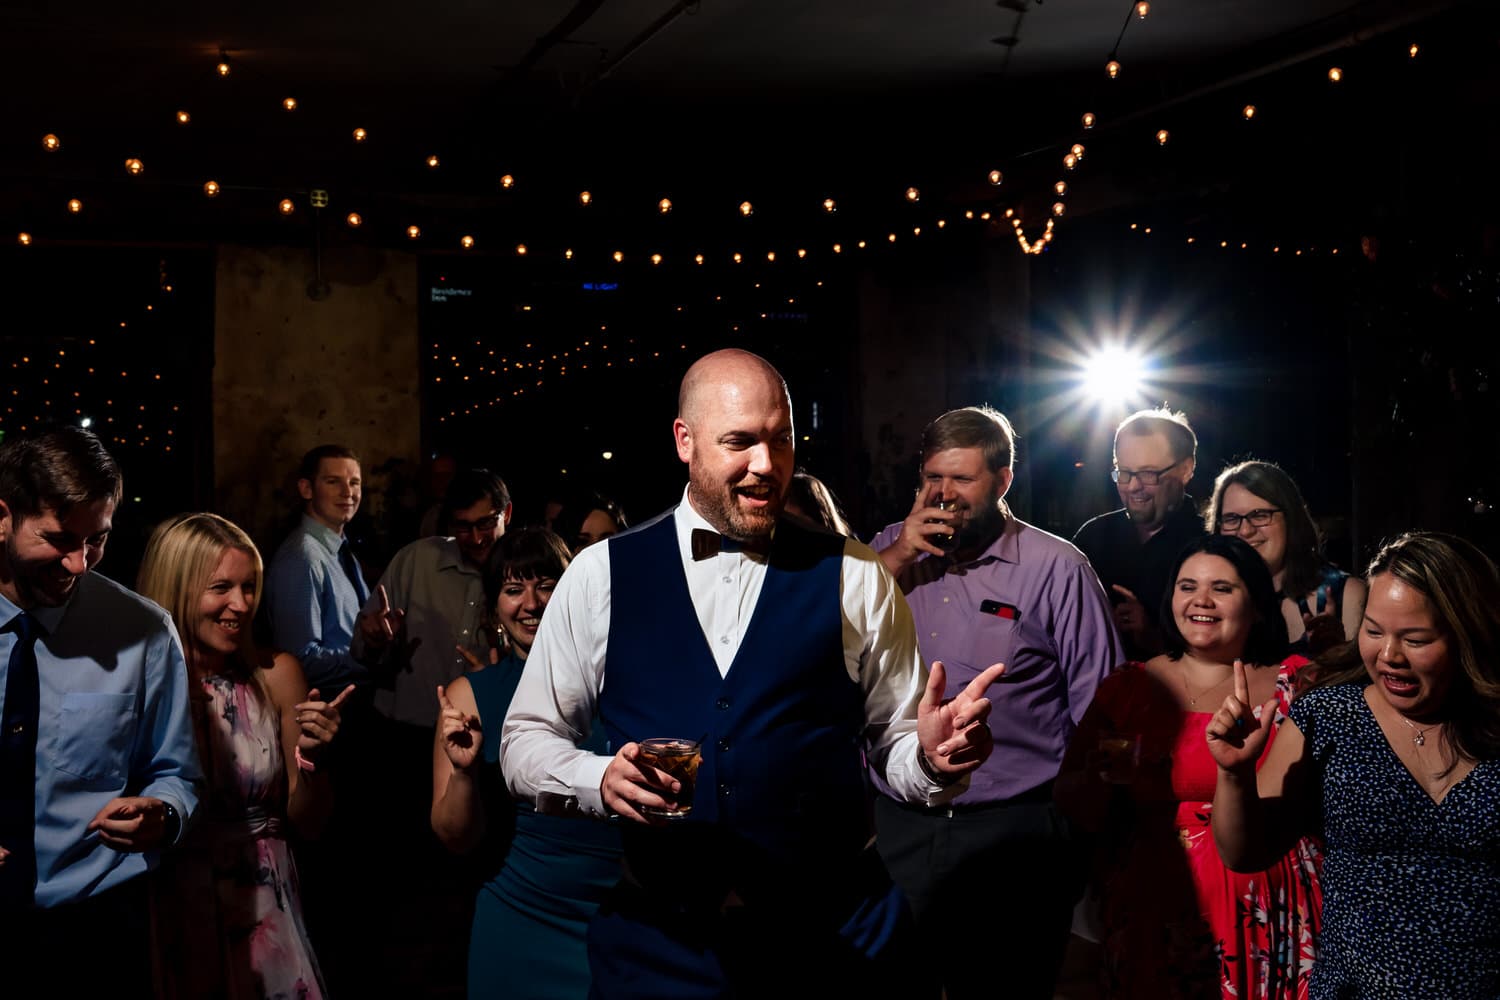 A candid picture of a groom pointing his fingers on the dance floor, surrounding by friends and family members doing the same thing. 